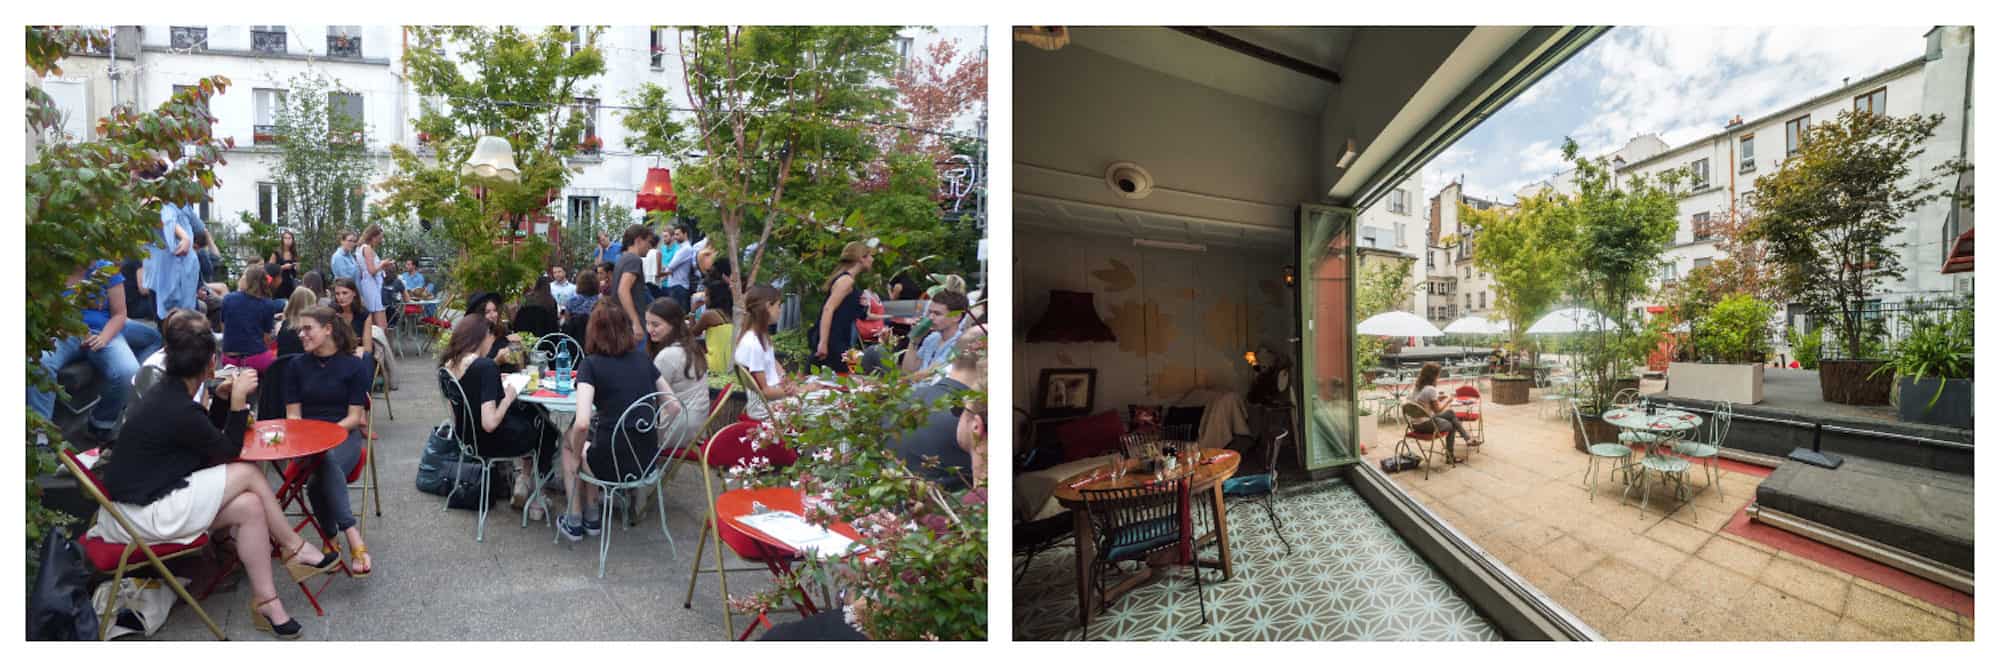 Locals having cocktails at the leafy Paris rooftop bar Le Bar à Bulles (left). Inside the shabby-chic Bar à Bulles, which leads out onto the terrace (right).